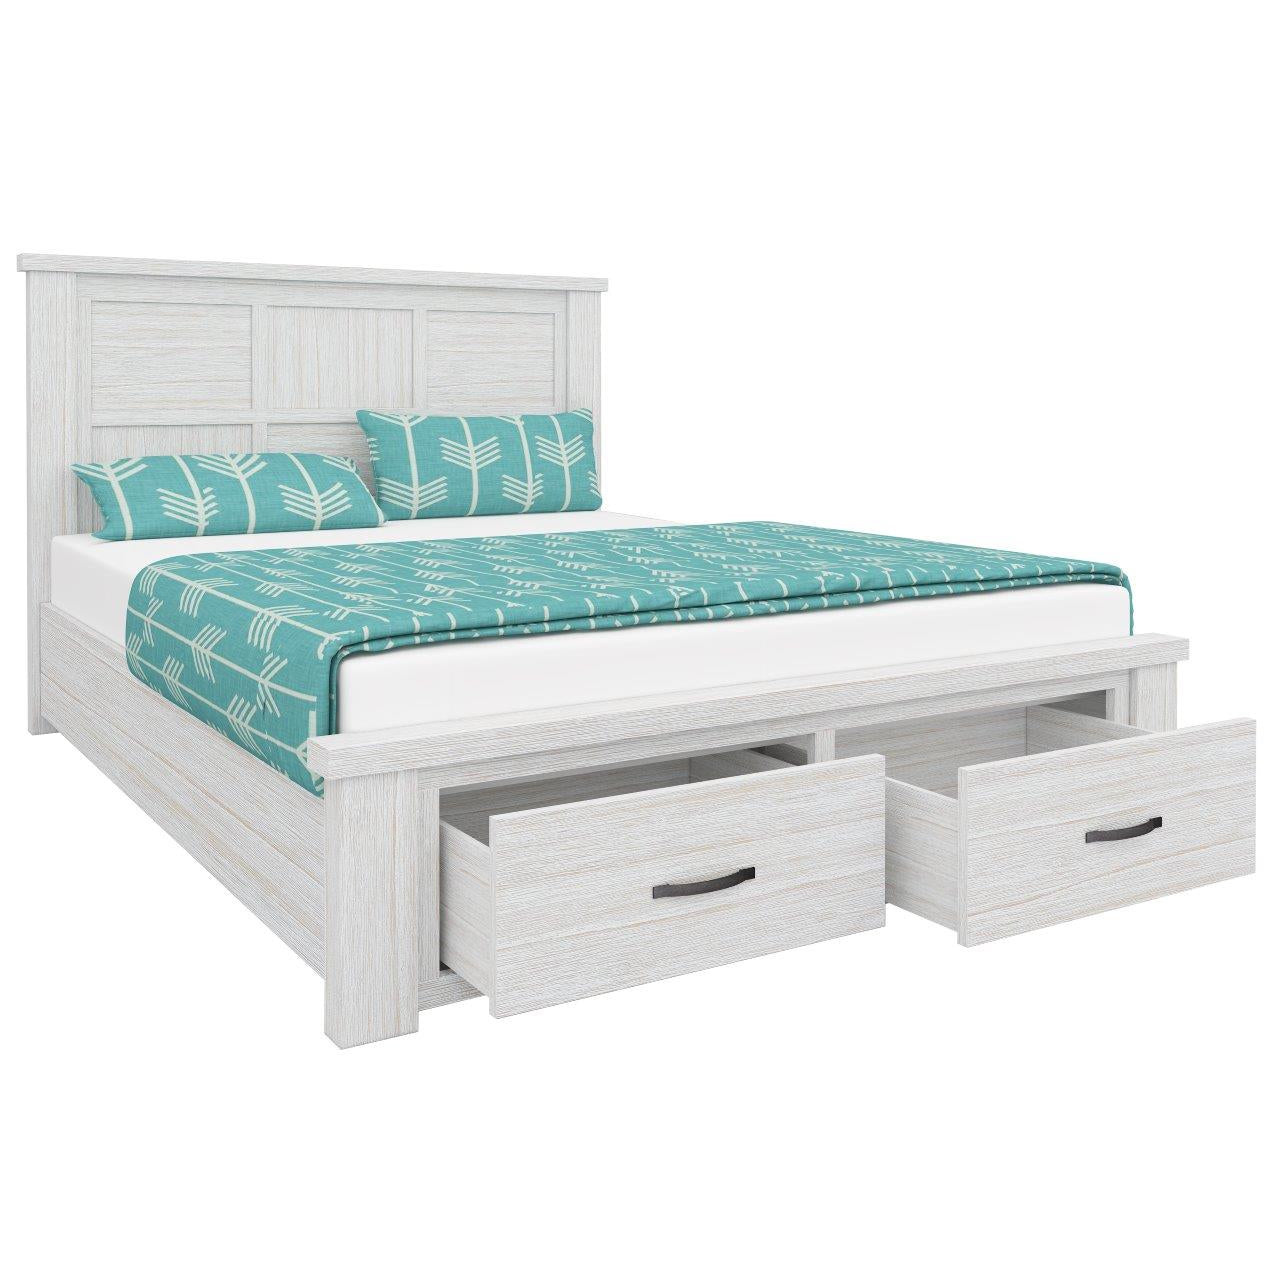 Double Foxglove Bed Frame With Storage Drawers - White